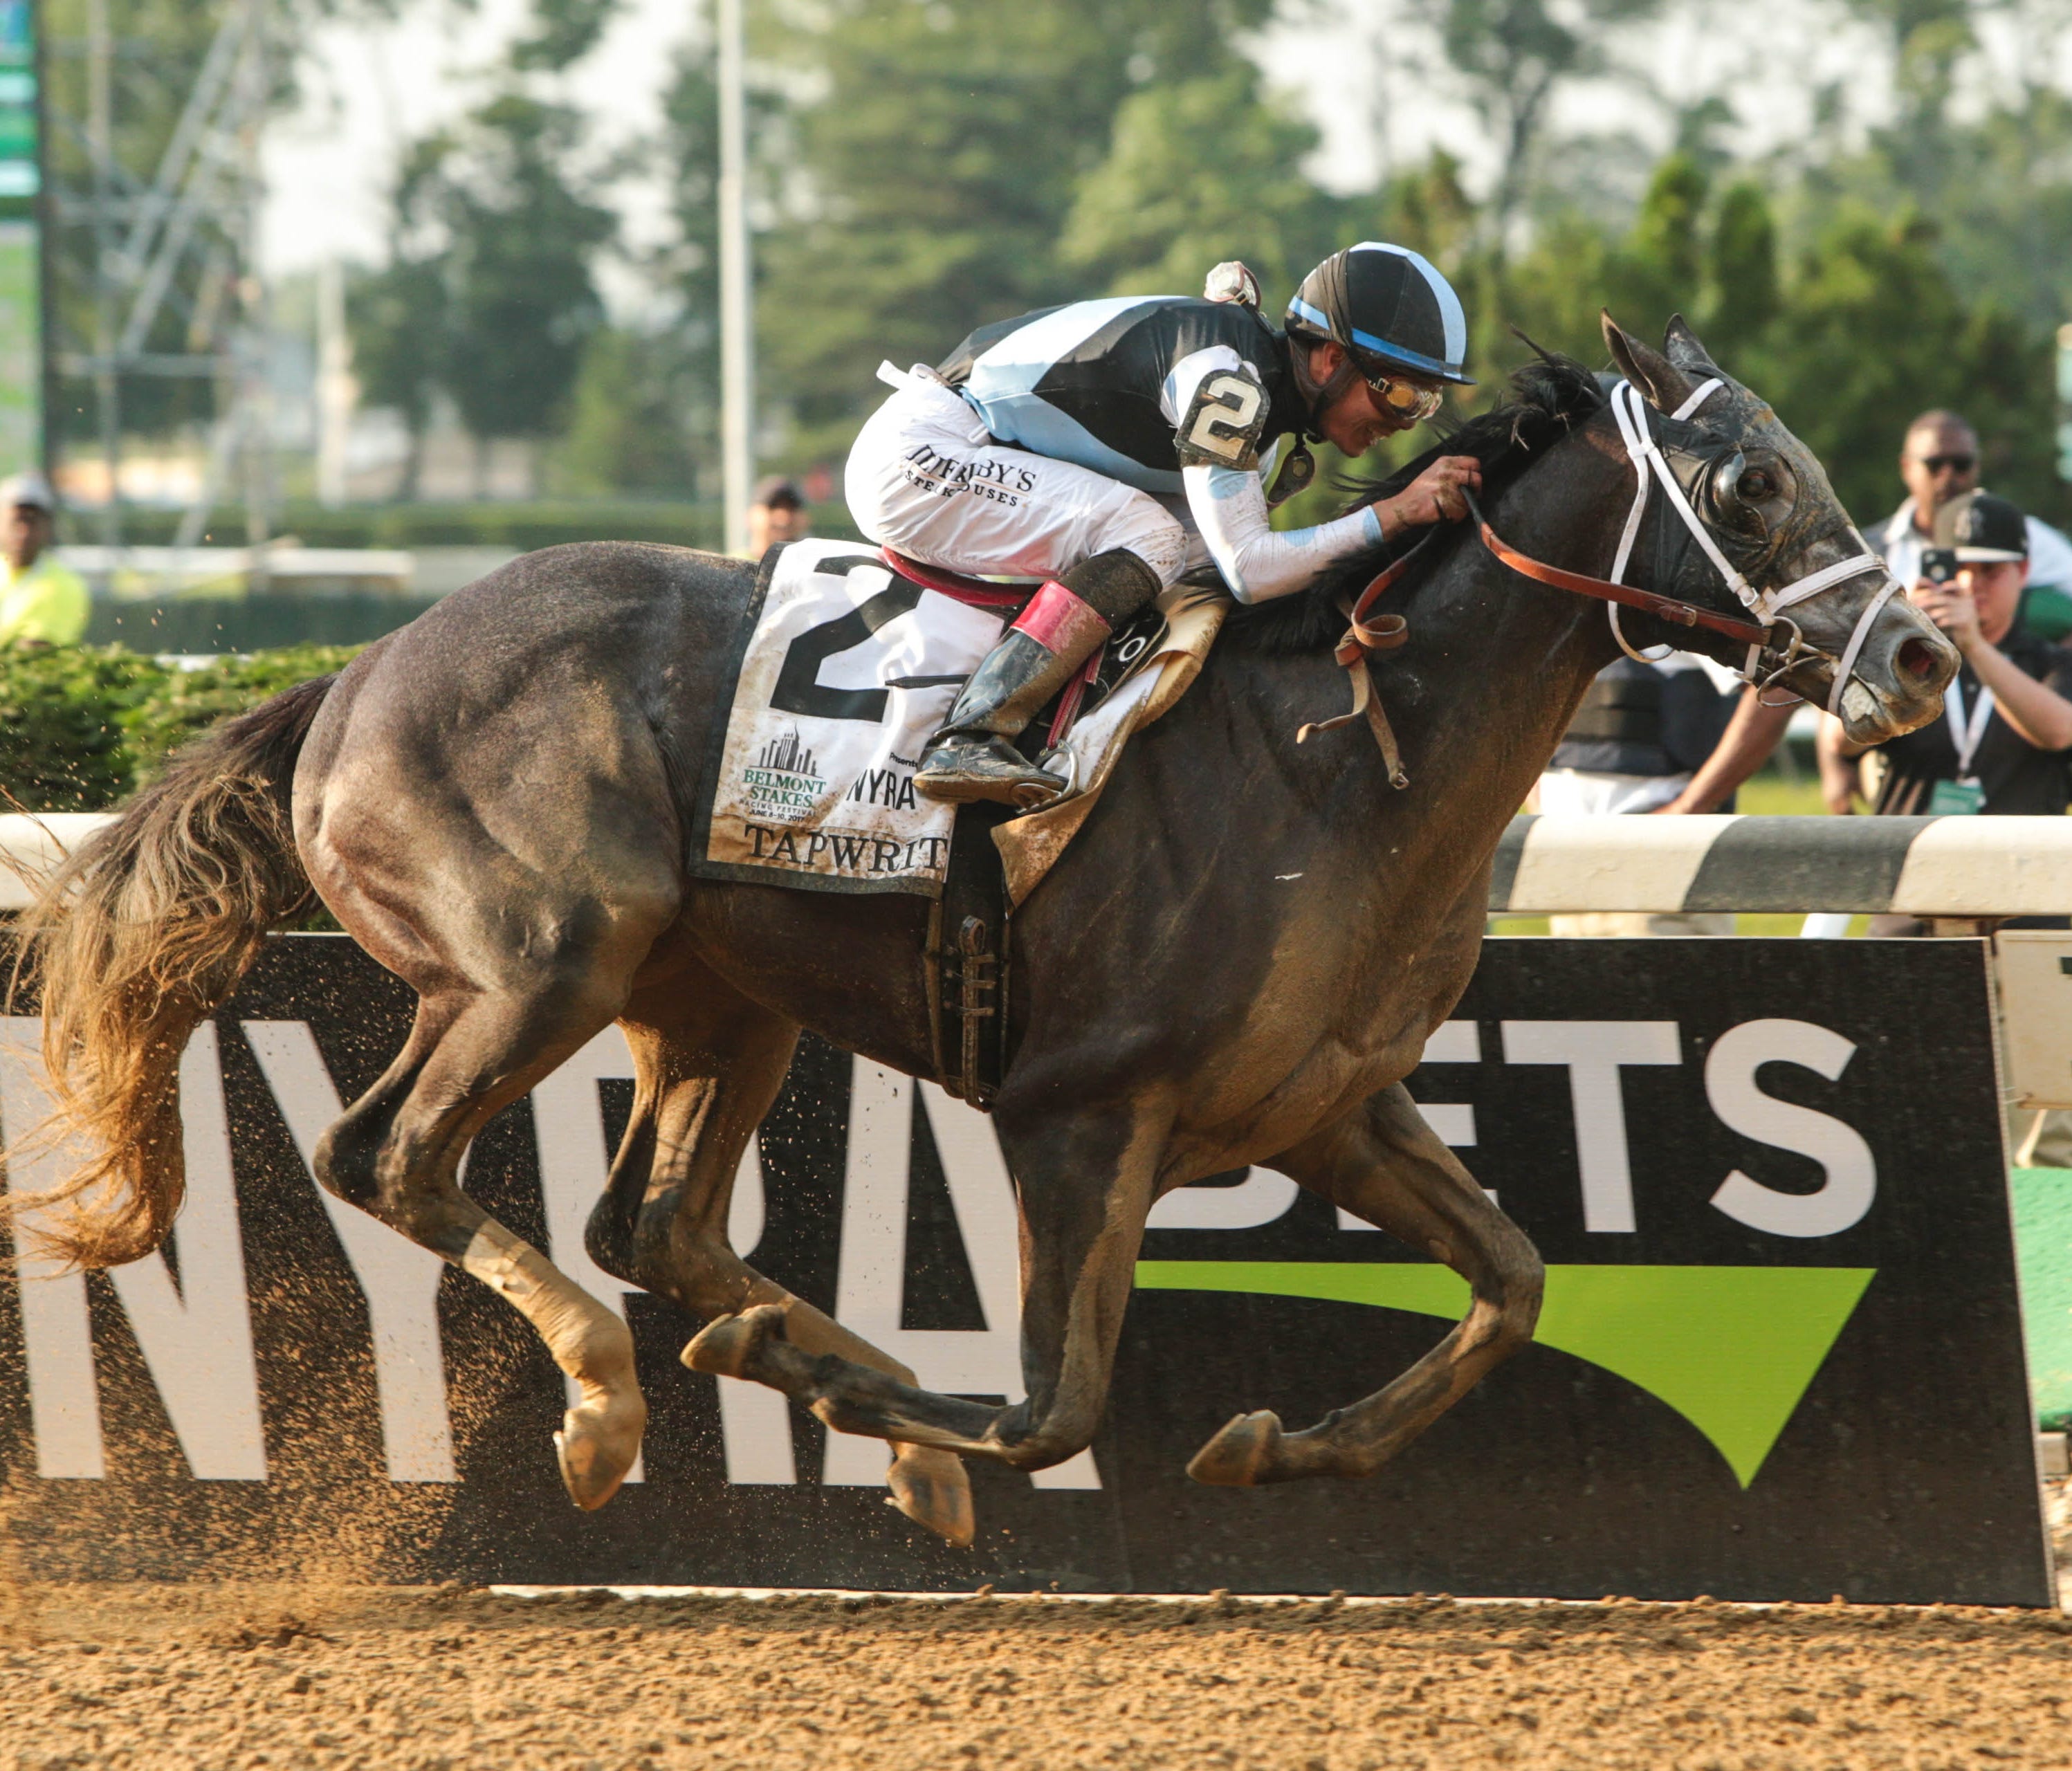 Tapwrit with jockey Jose Ortiz crosses the line to win the 149th Belmont Stakes.